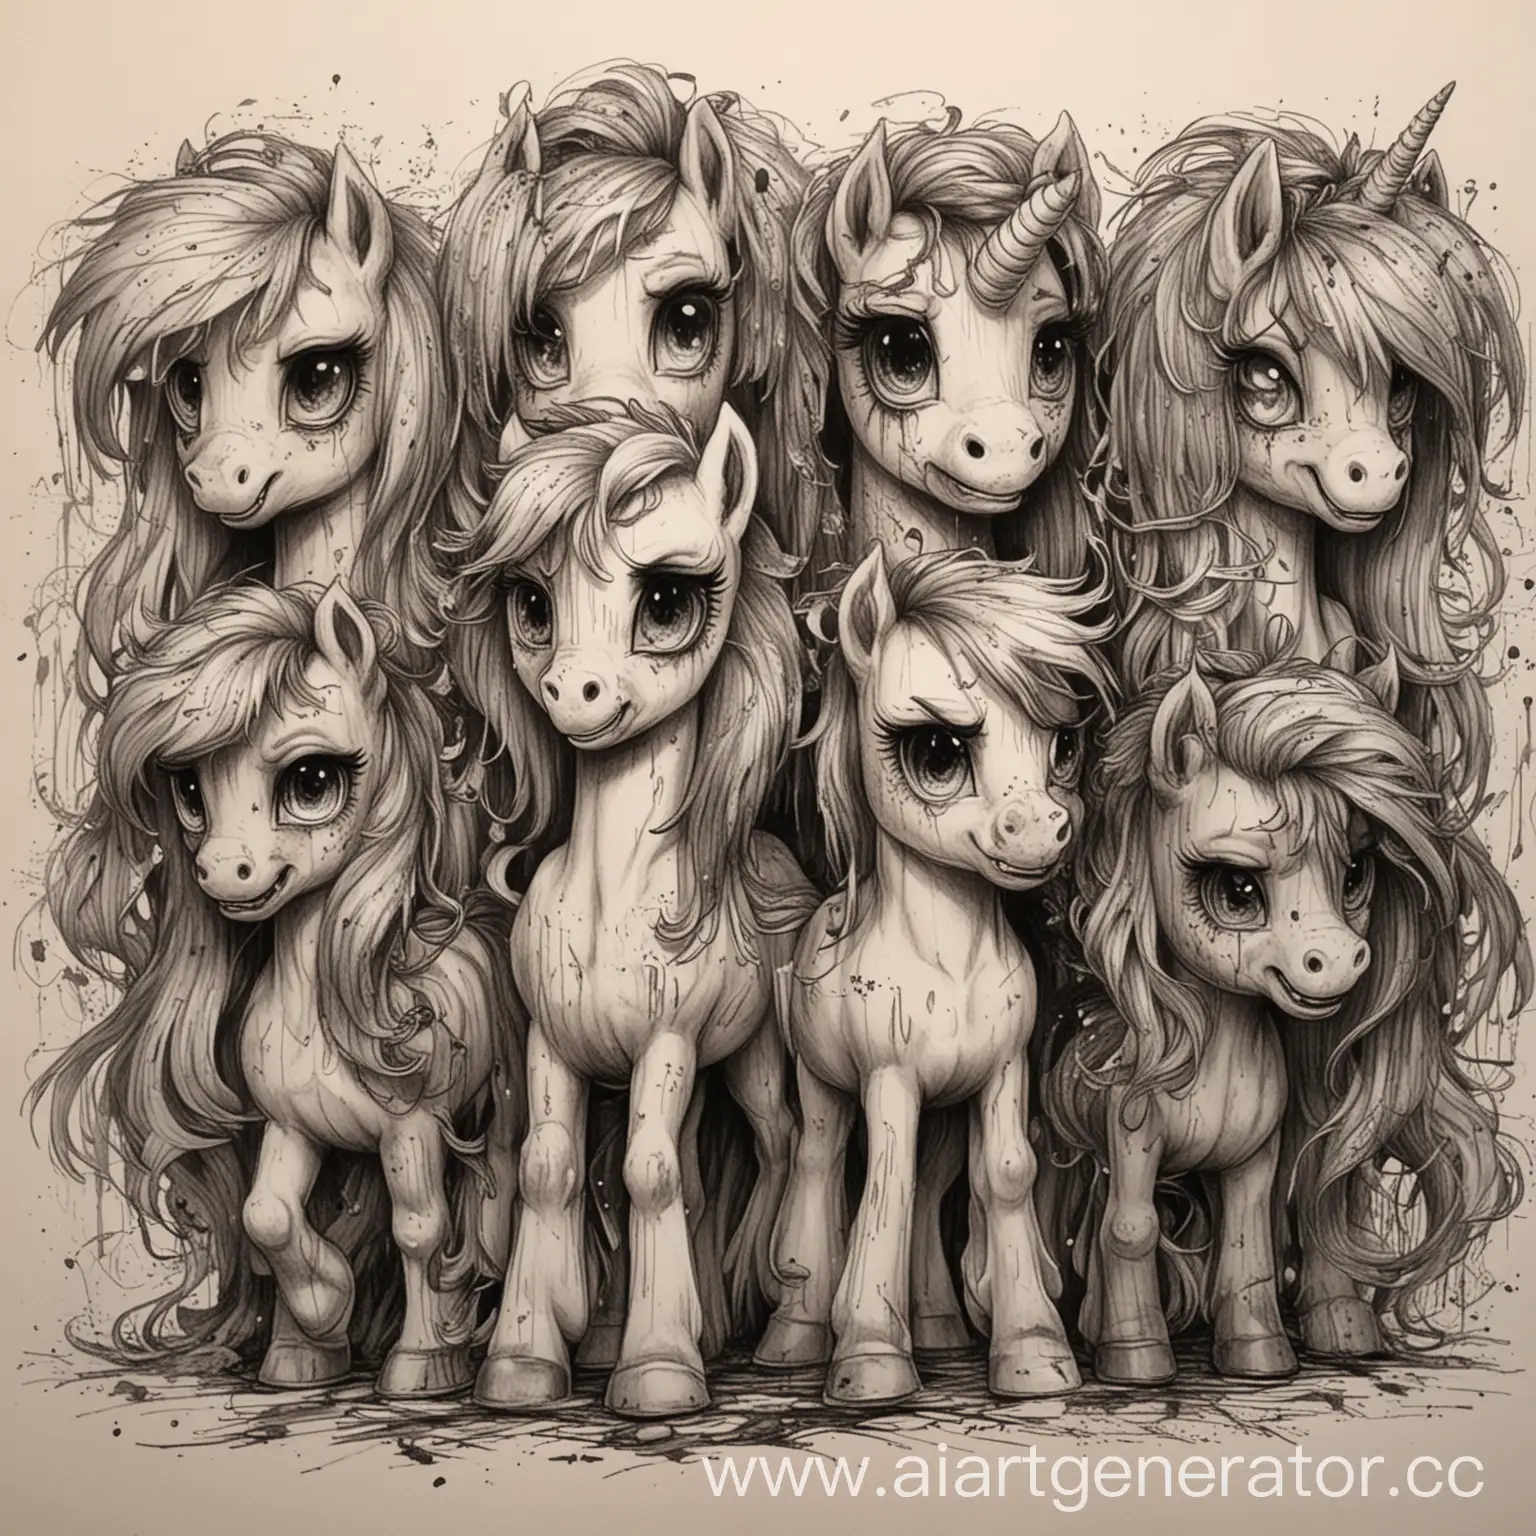 Ponies-in-My-Little-Pony-Style-with-a-Horror-Twist